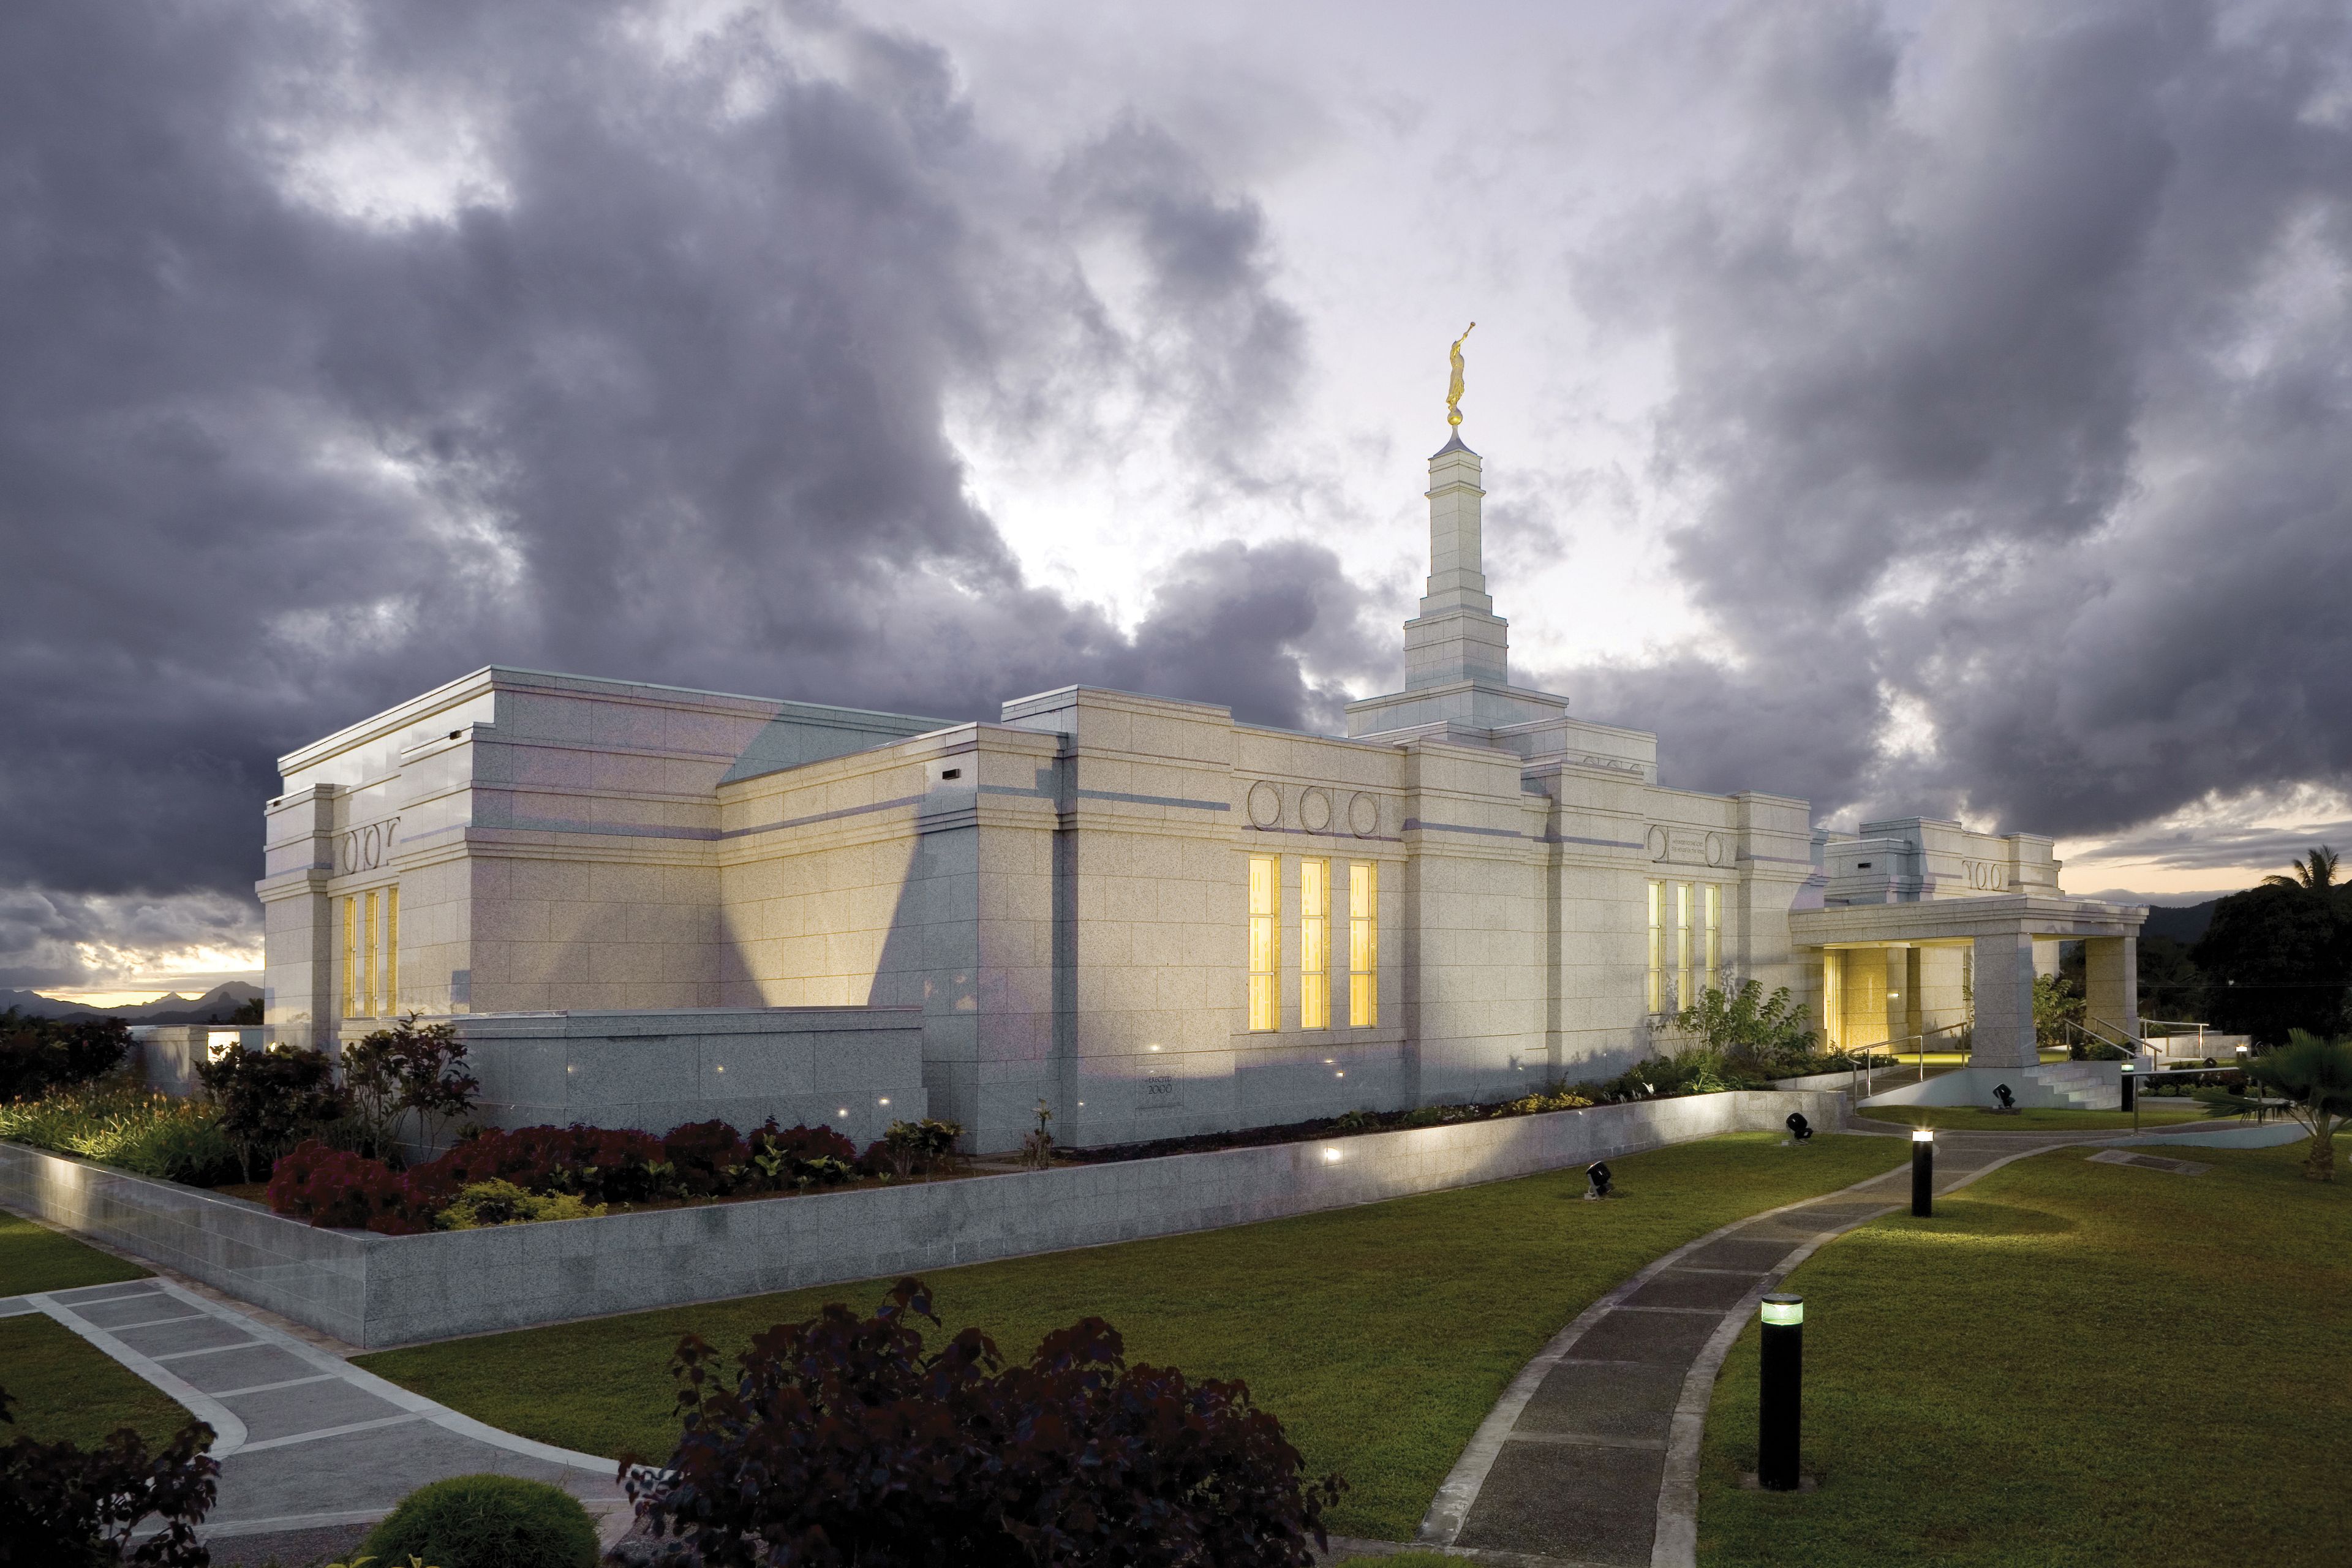 The Suva Fiji Temple in the evening, including the entrance and scenery. © undefined ipCode 1.